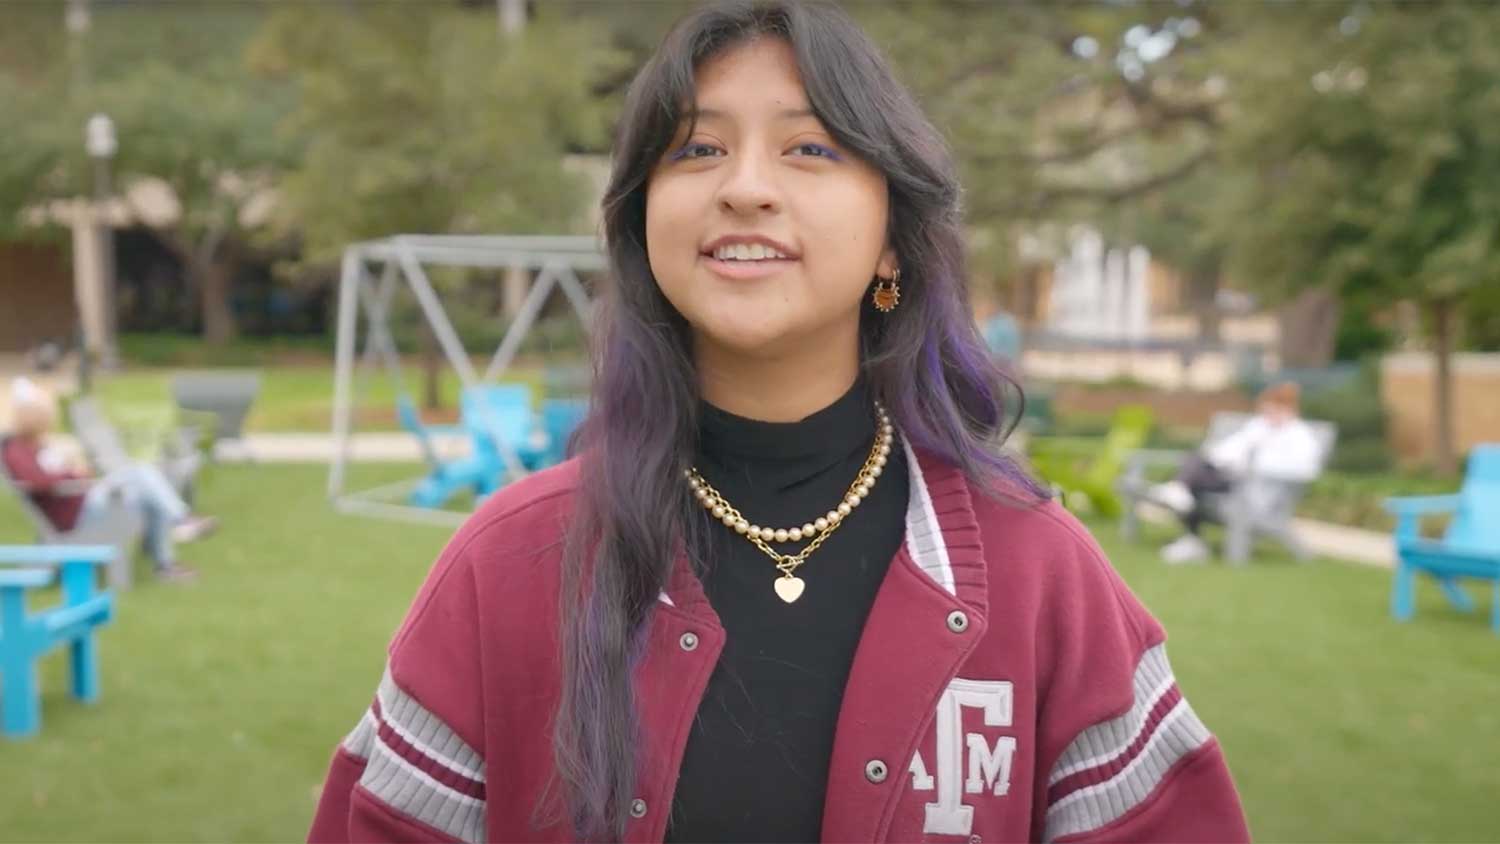 Campus tour video narrator student addressing the camera about coming to Texas A&M